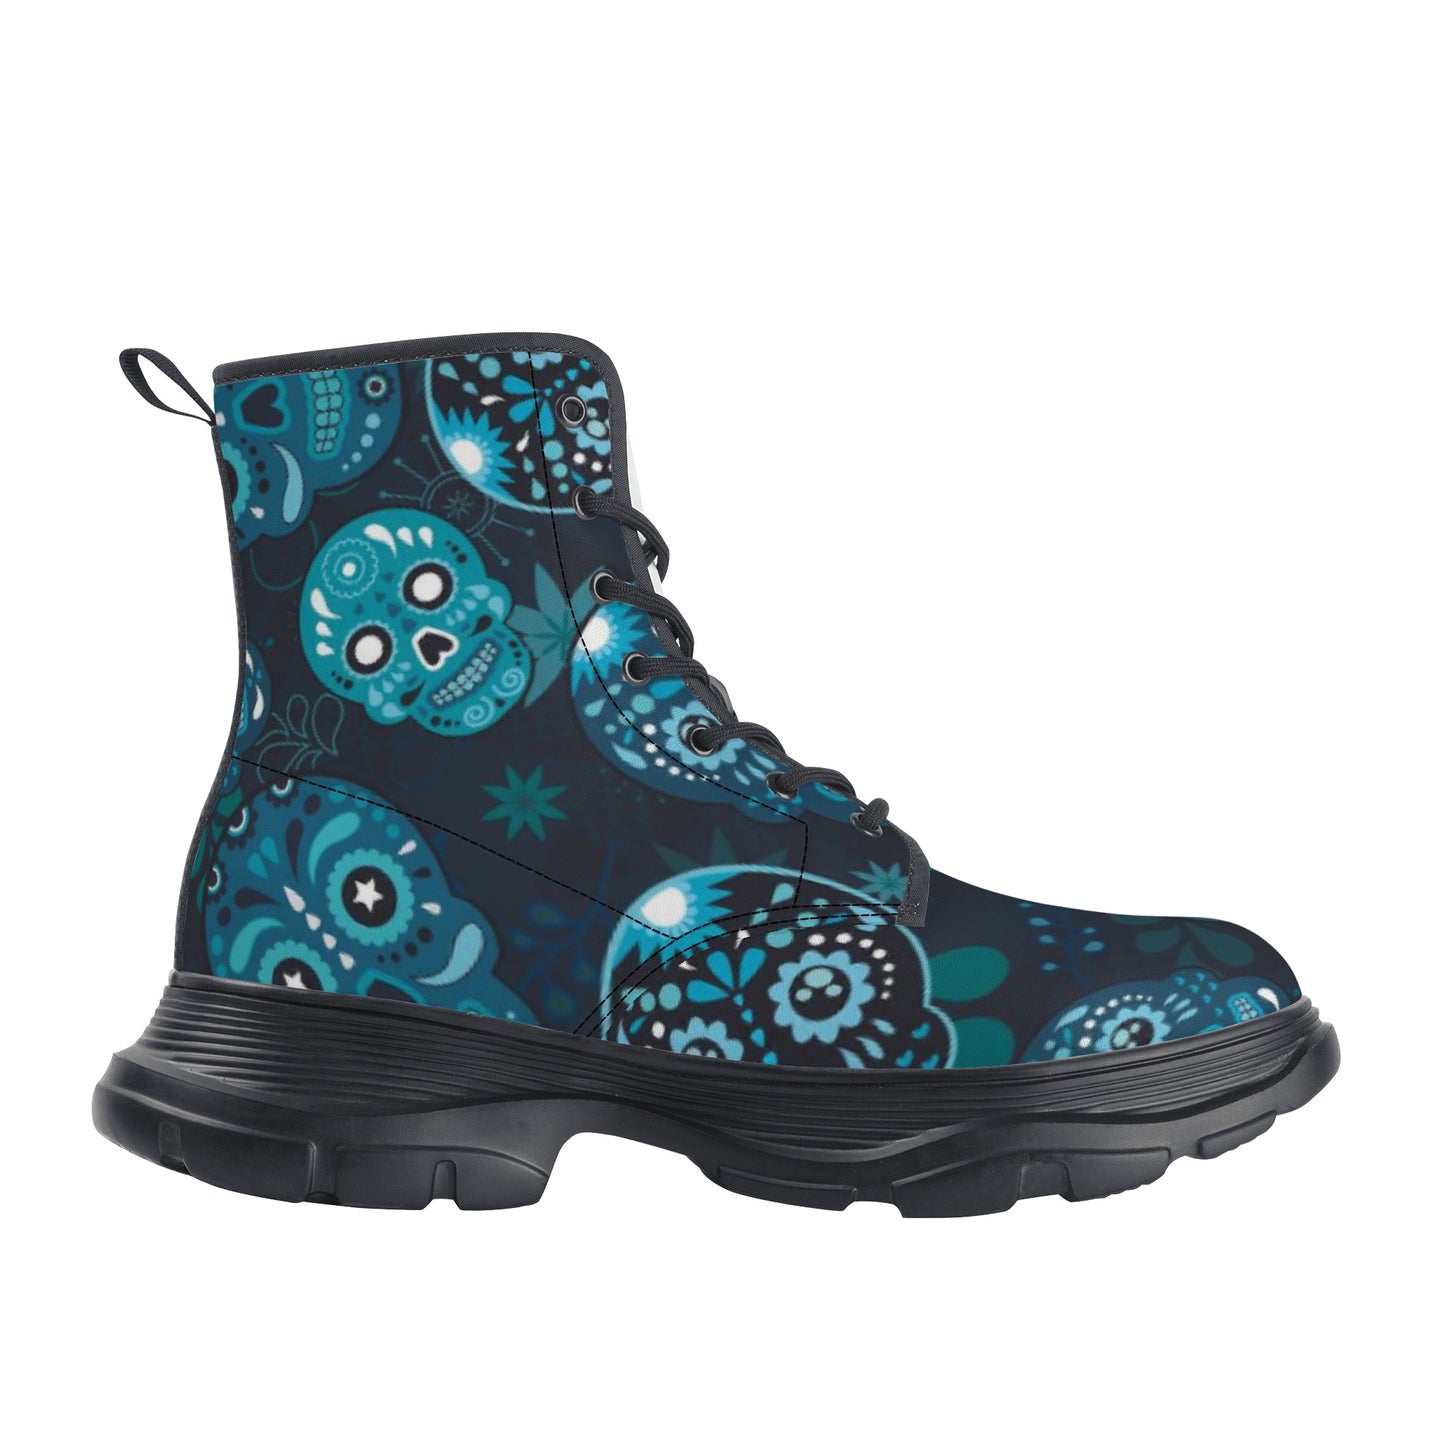 Sugar skull day of the dead Women's Leather Chunky Boots